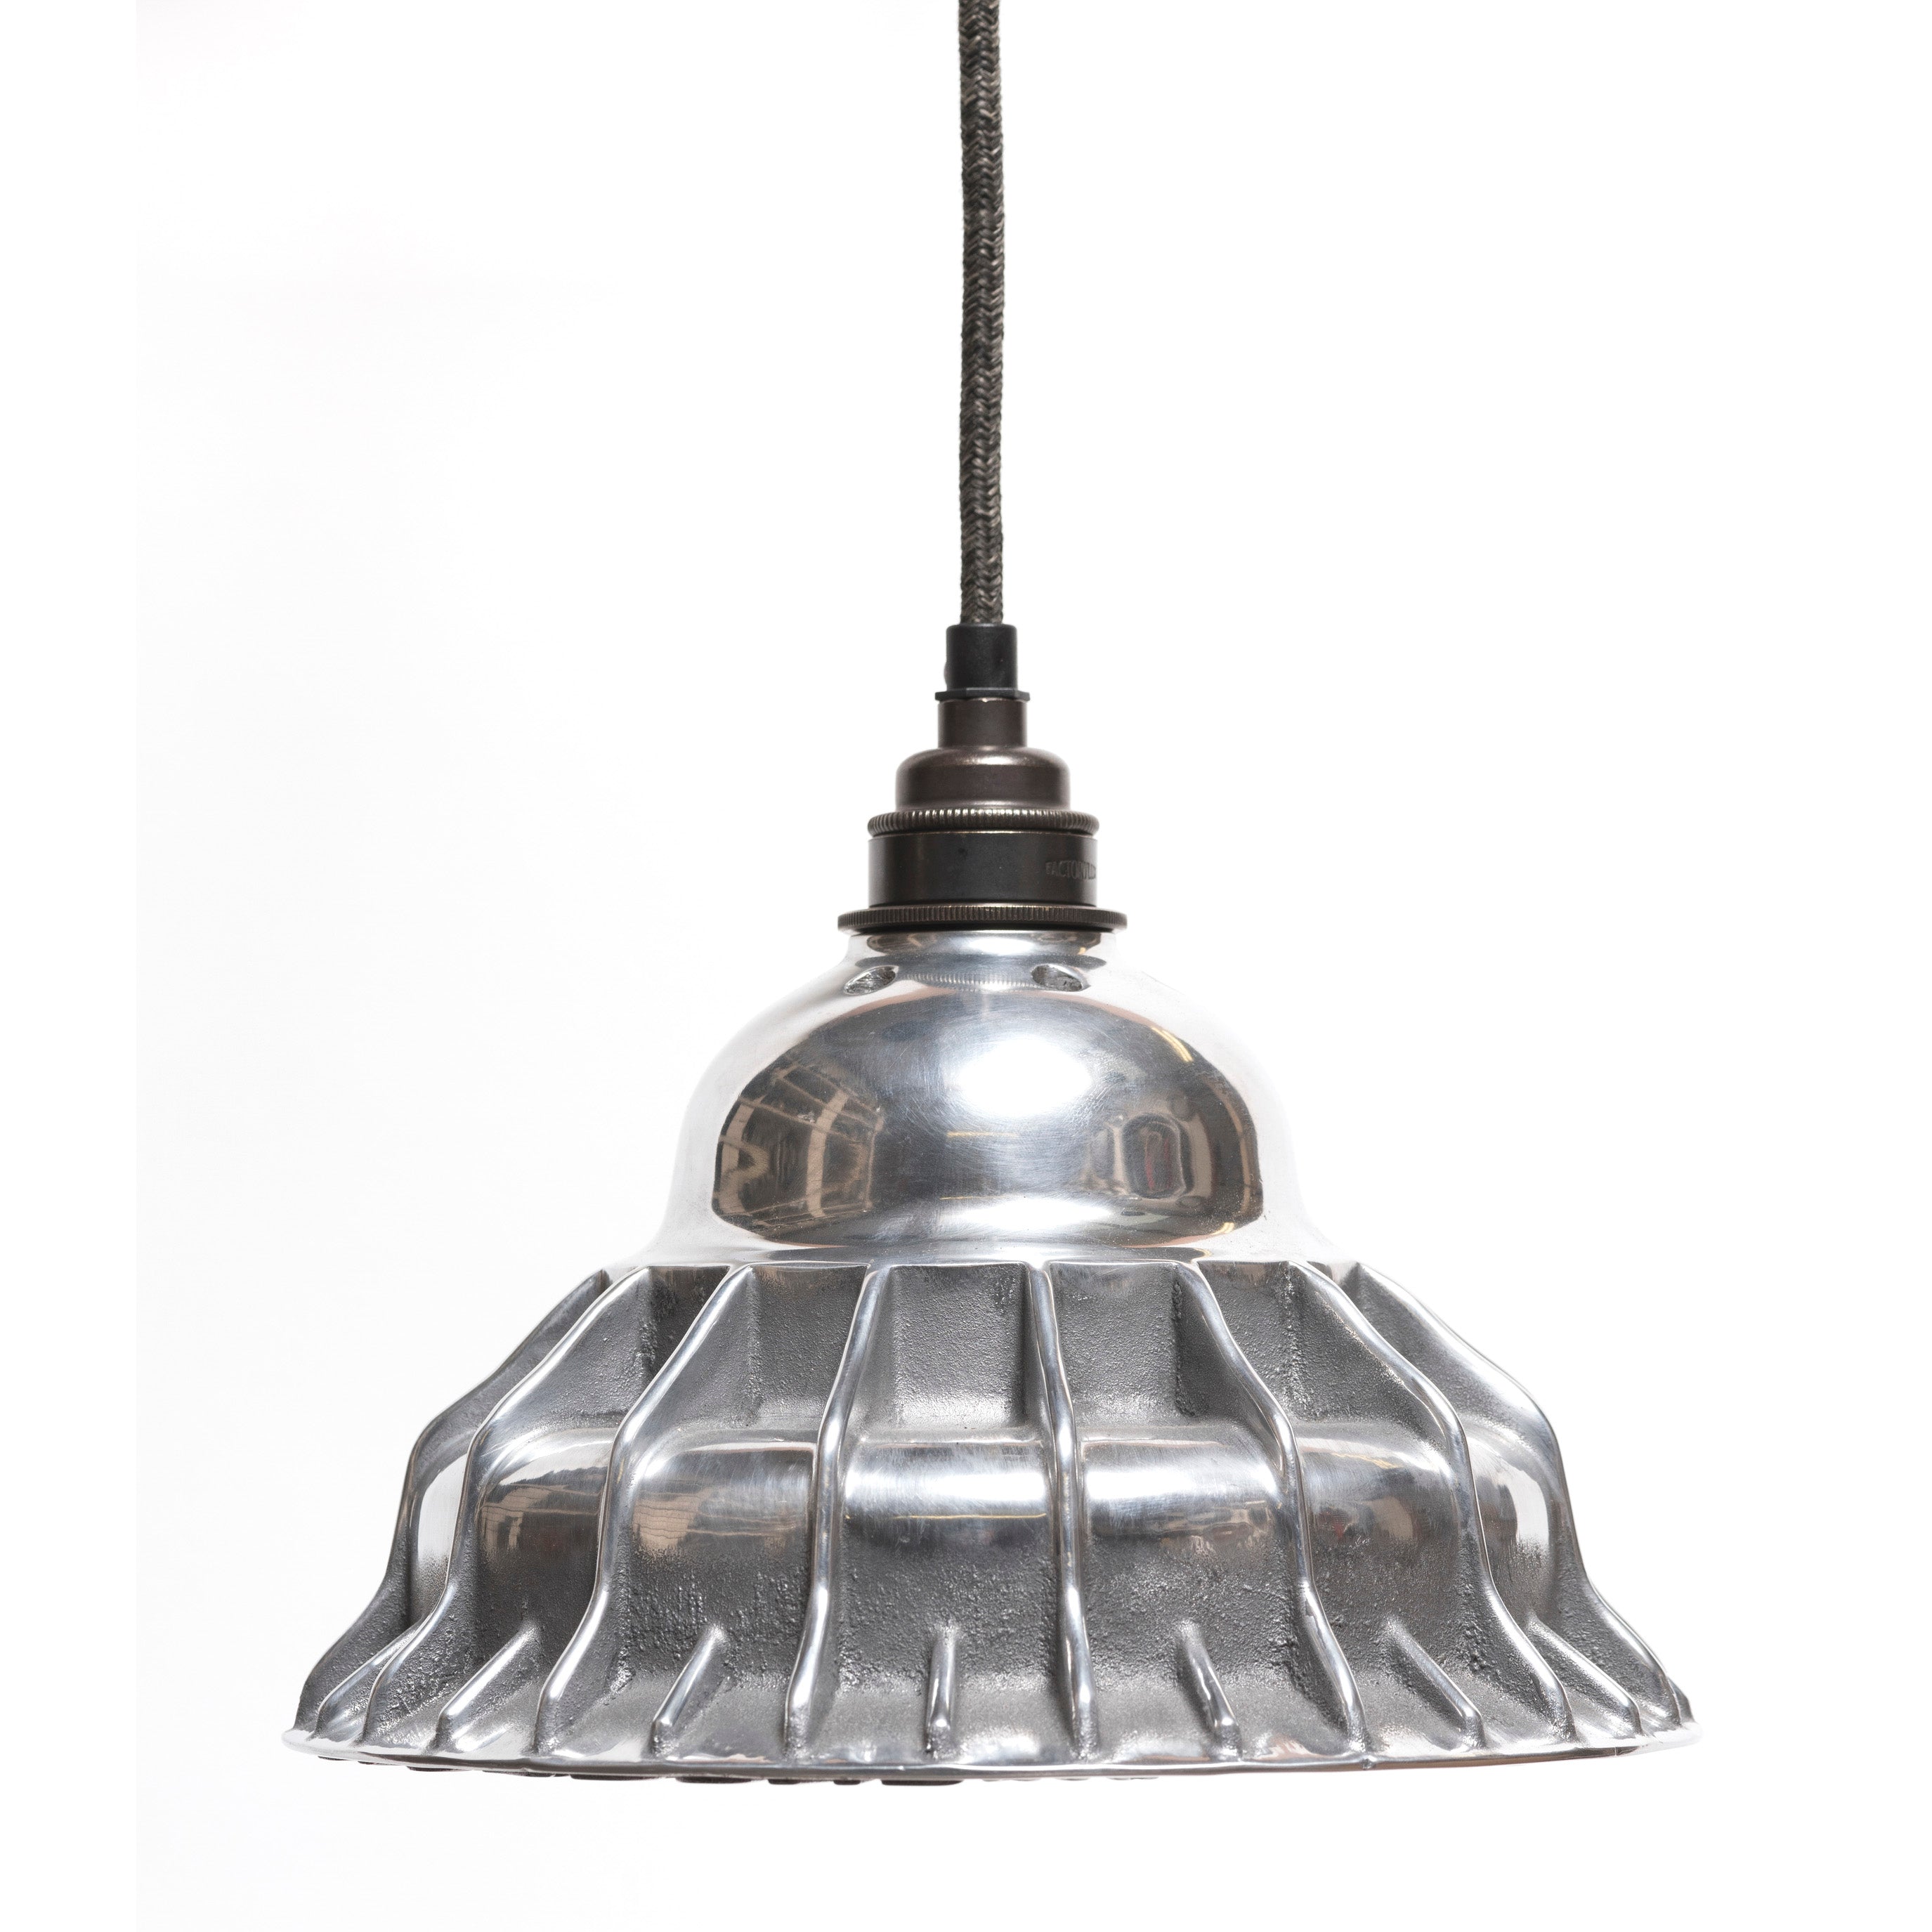 The Rag & Bone Man Pattern #5 Combination pendant lamp in polished aluminium from Warehouse Home